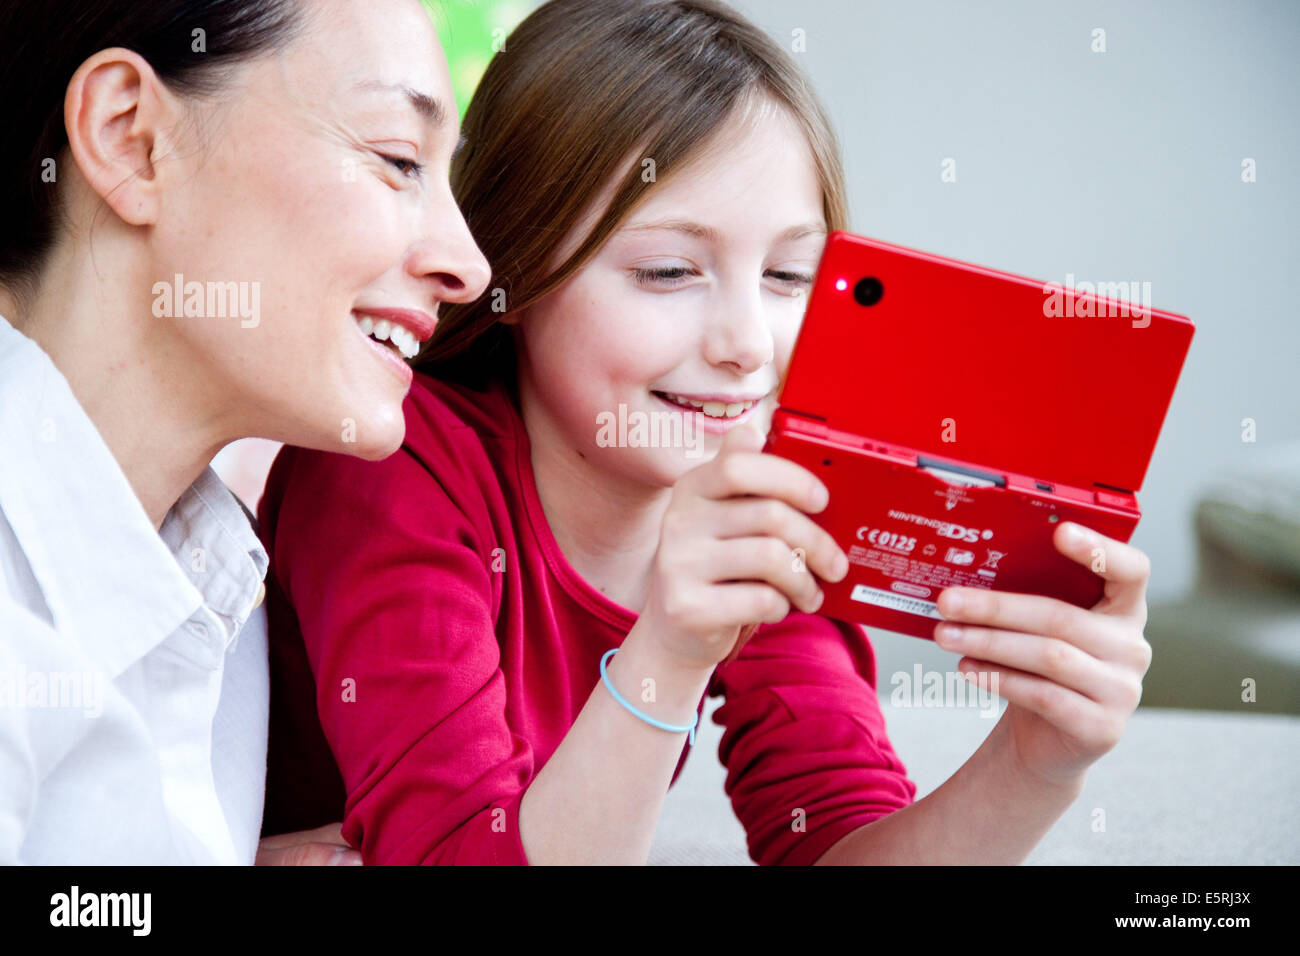 9 year old girl playing with video game console. Stock Photo